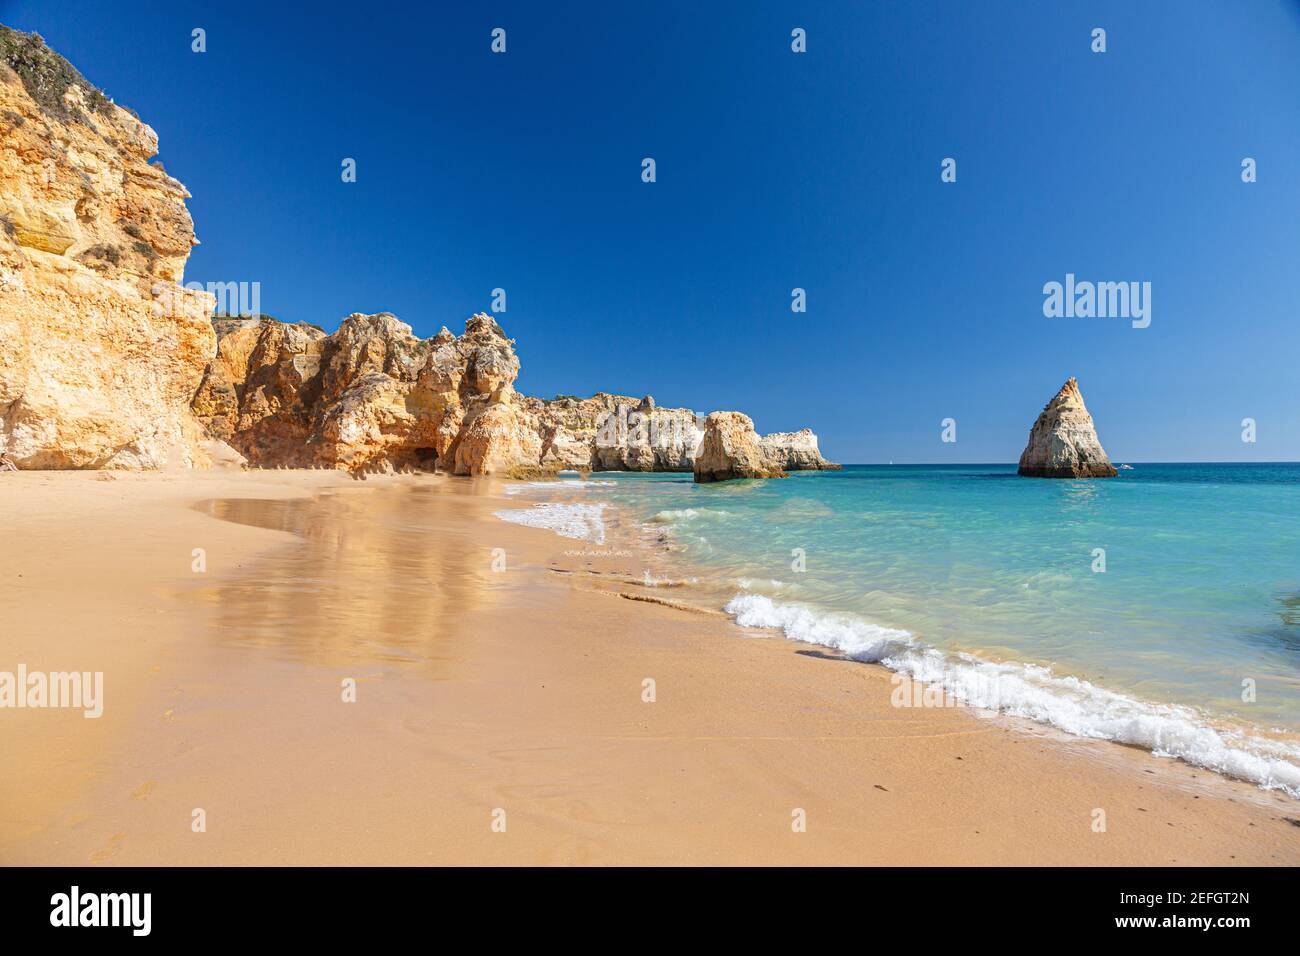 View on typical cliffy beach at Algarve coastline in Portugal Stock Photo